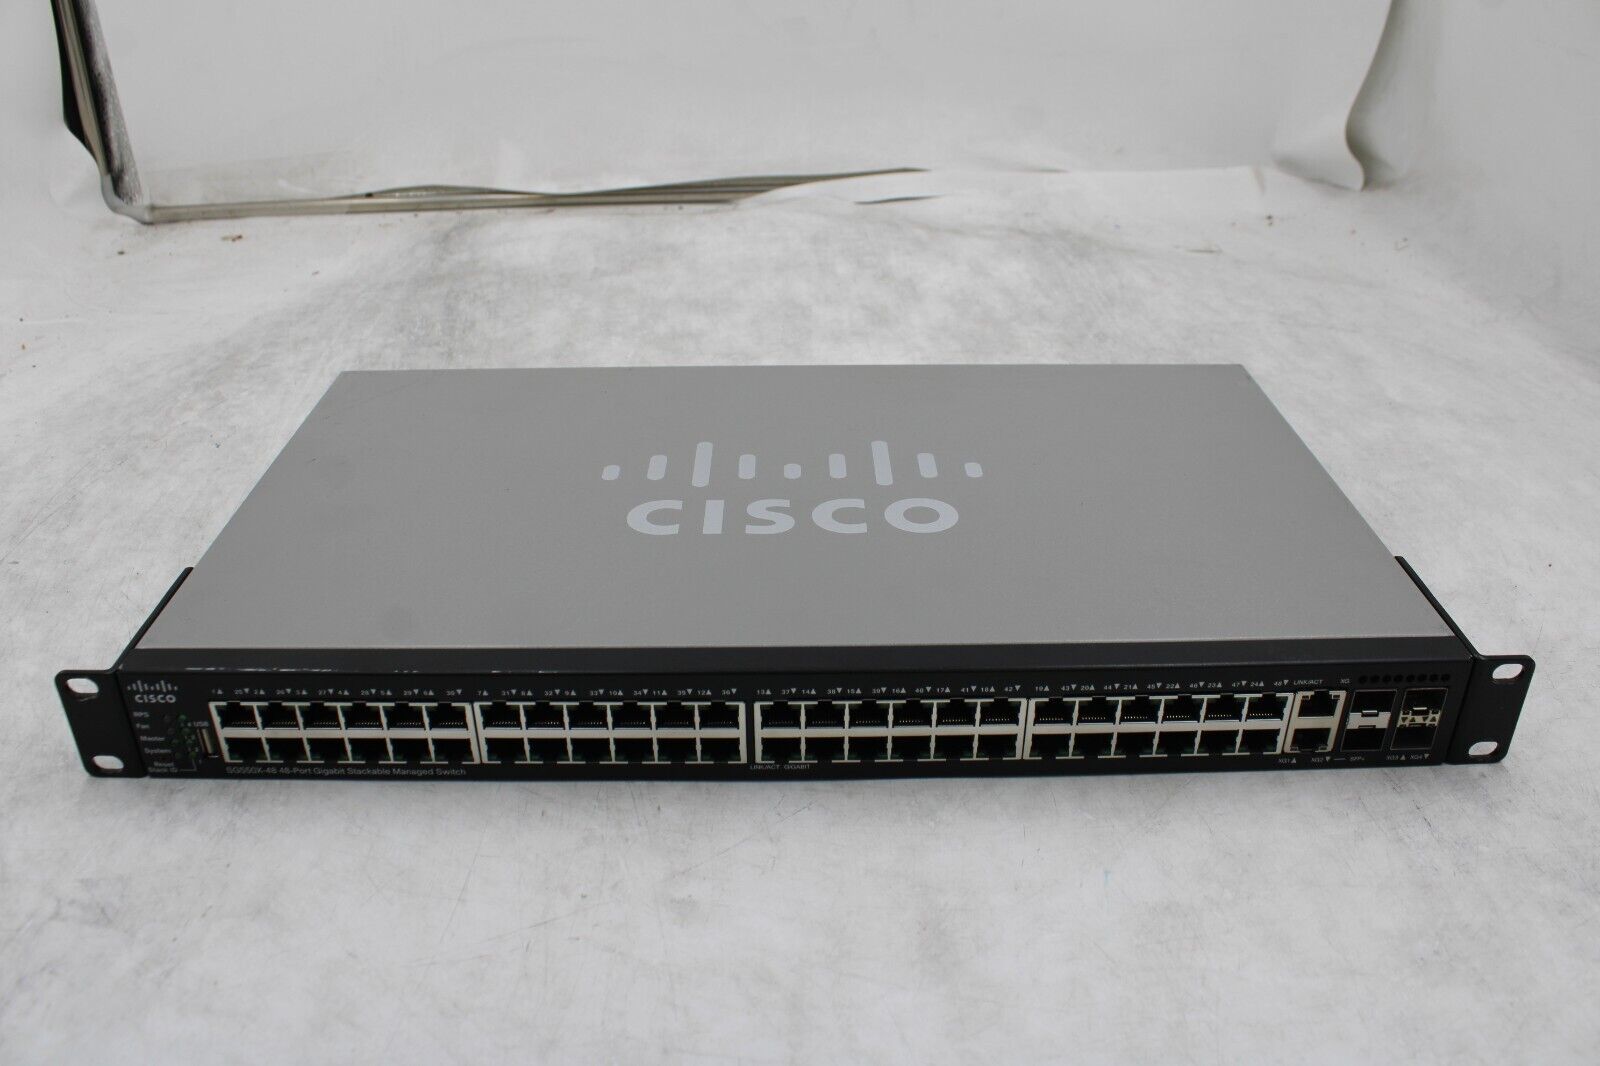 Cisco SG550X-48 48-Port Gigabit Stackable Managed Switch TESTED